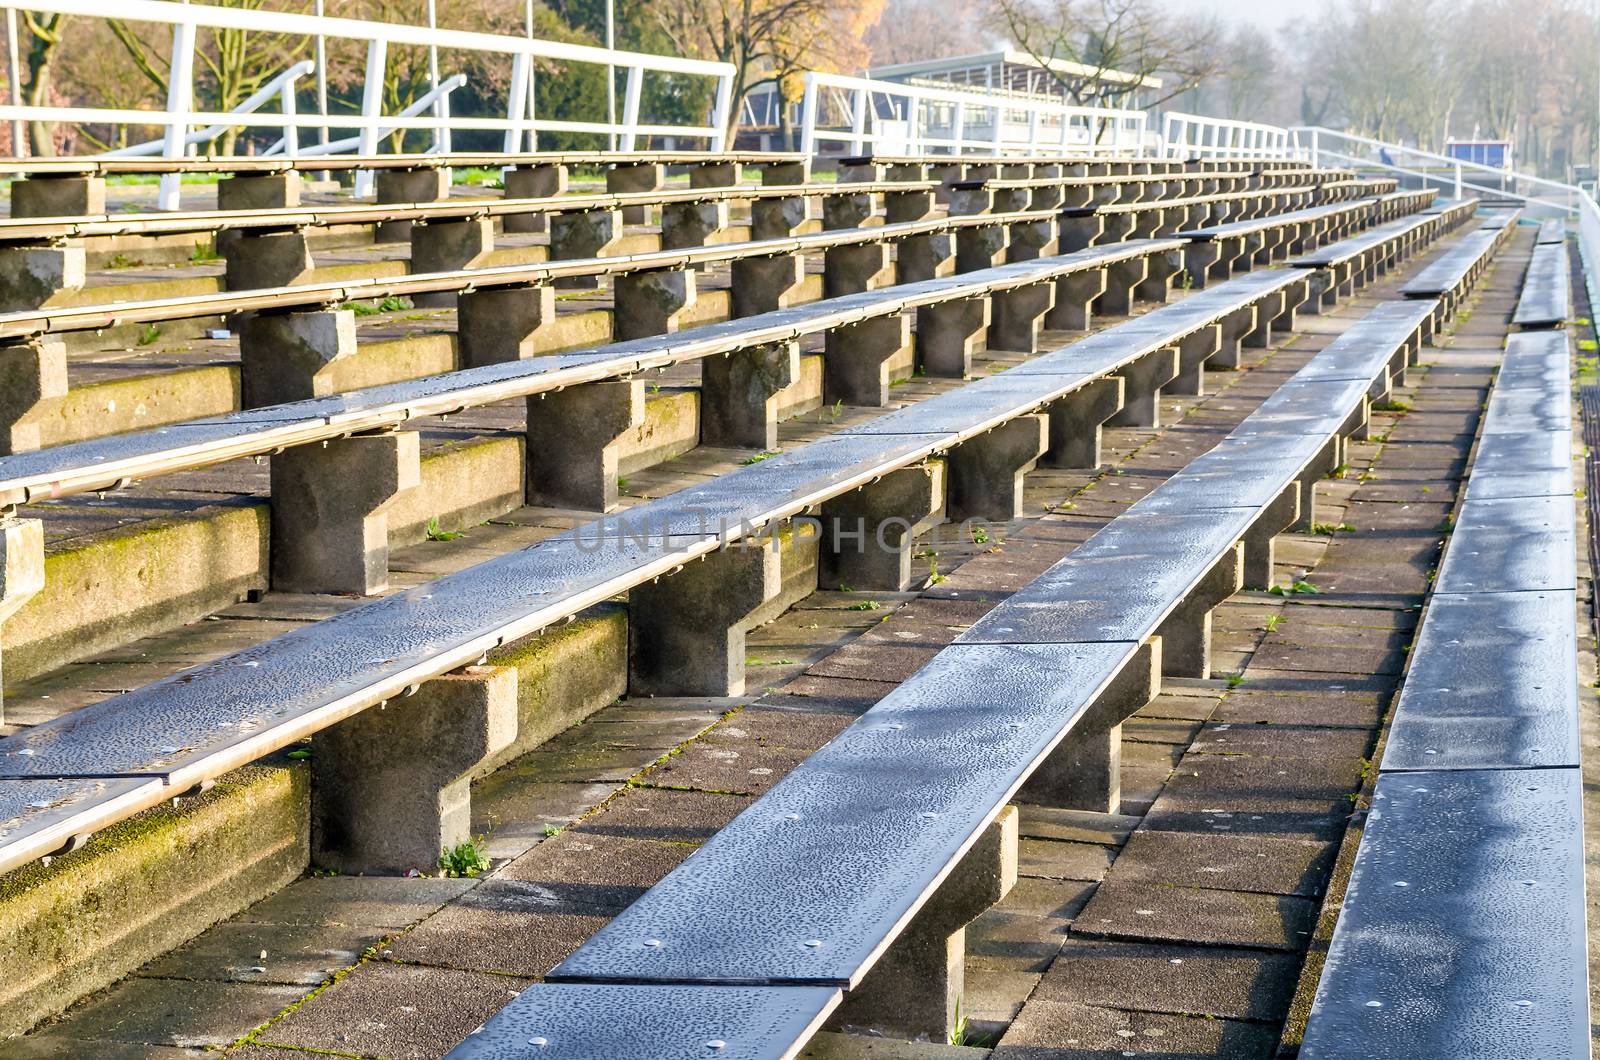 Rows of seats, chairs, benches for a sporting event.